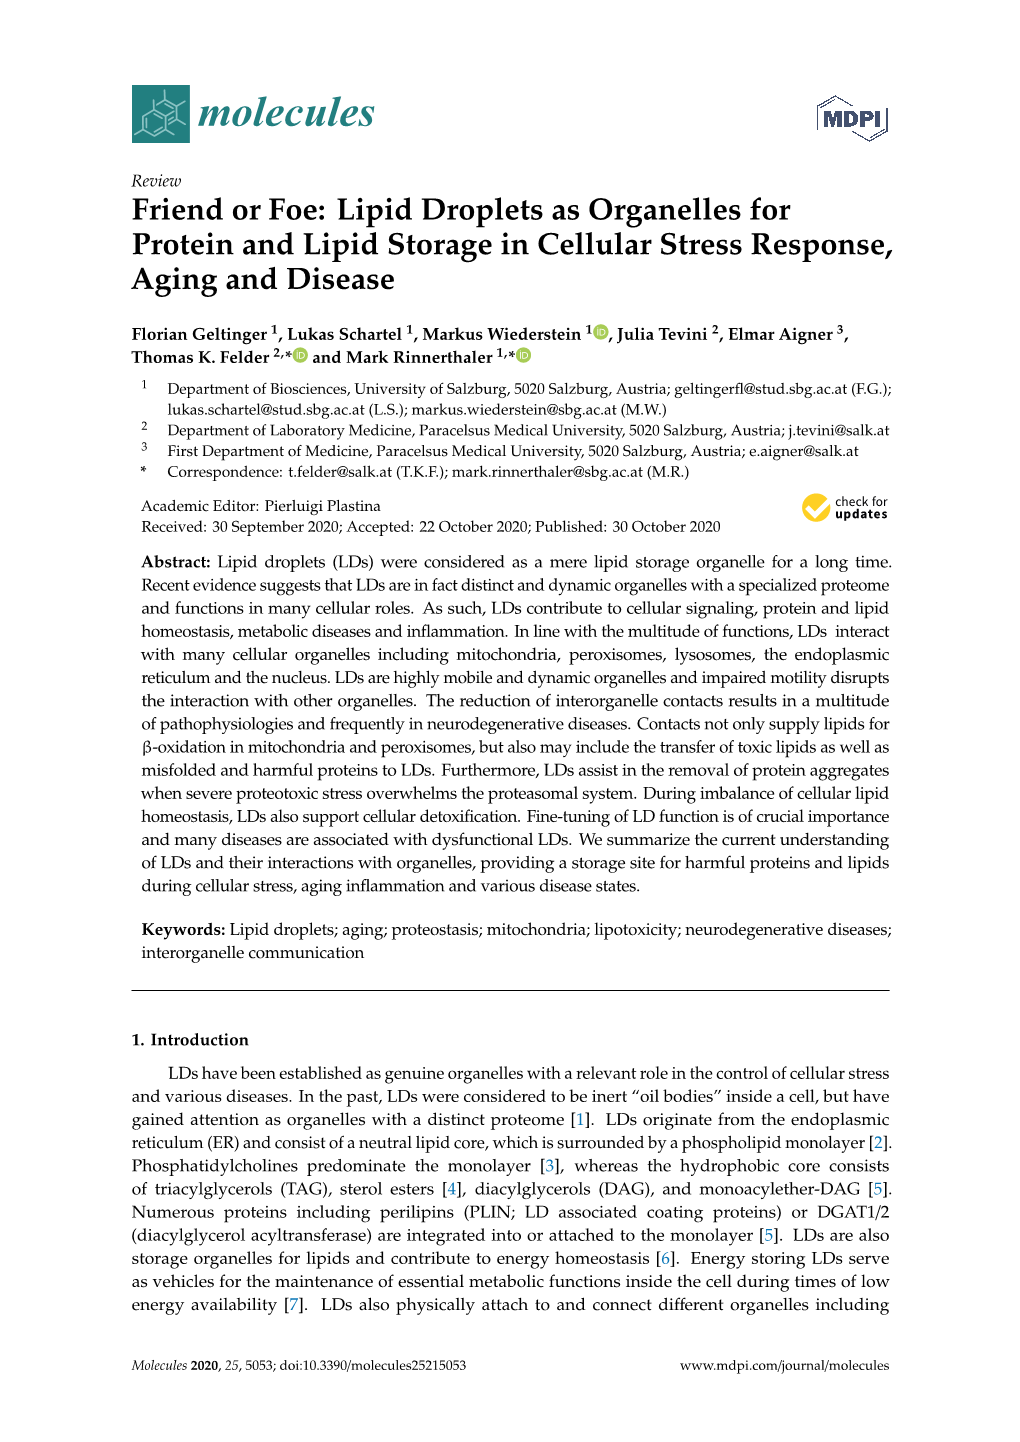 Friend Or Foe: Lipid Droplets As Organelles for Protein and Lipid Storage in Cellular Stress Response, Aging and Disease